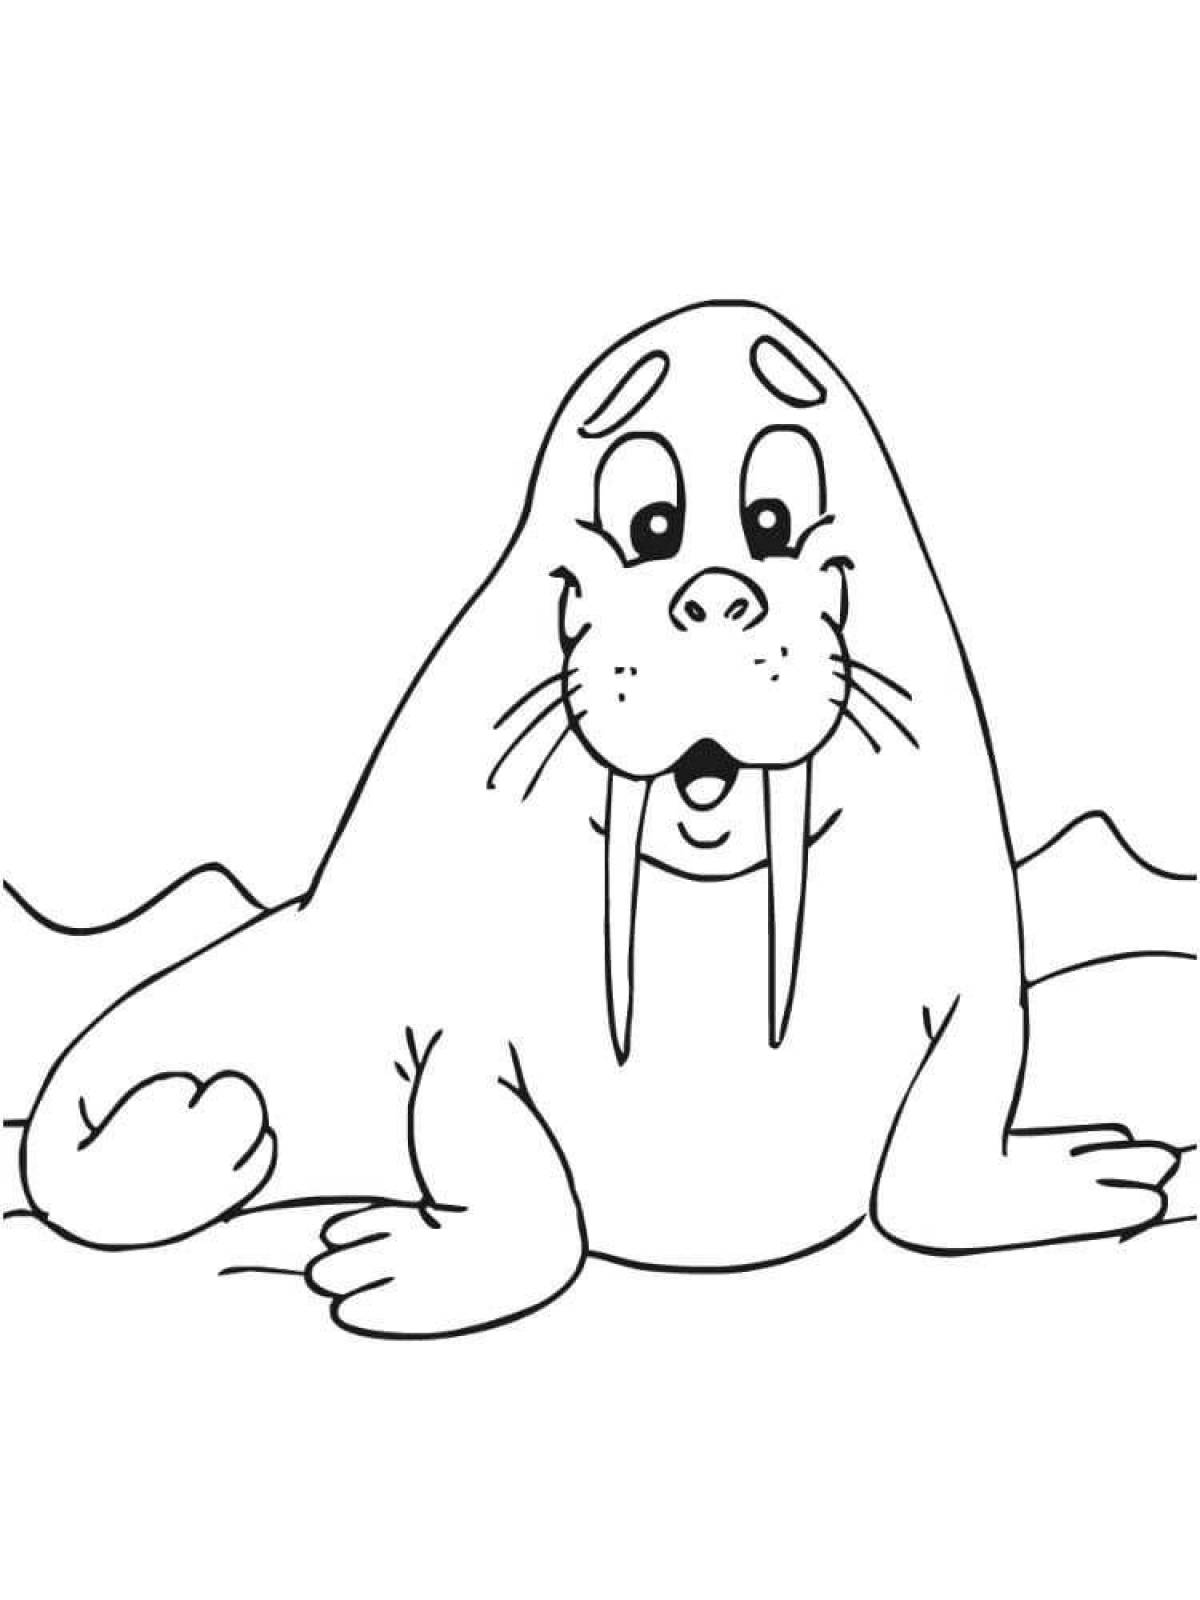 Adorable walrus coloring book for kids